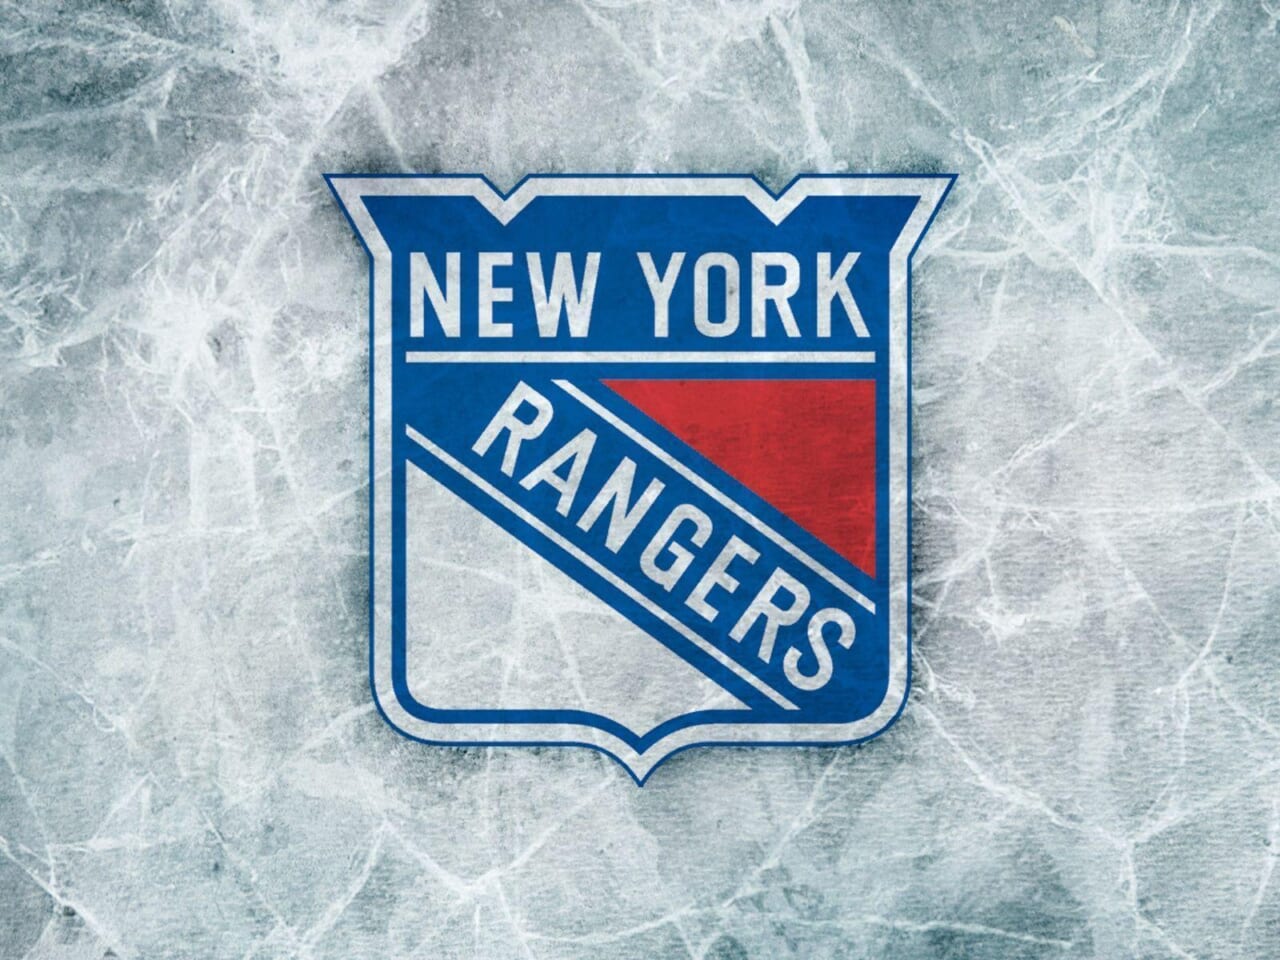 New York Rangers have schedule change due to the Devils’ COVID-19 issues